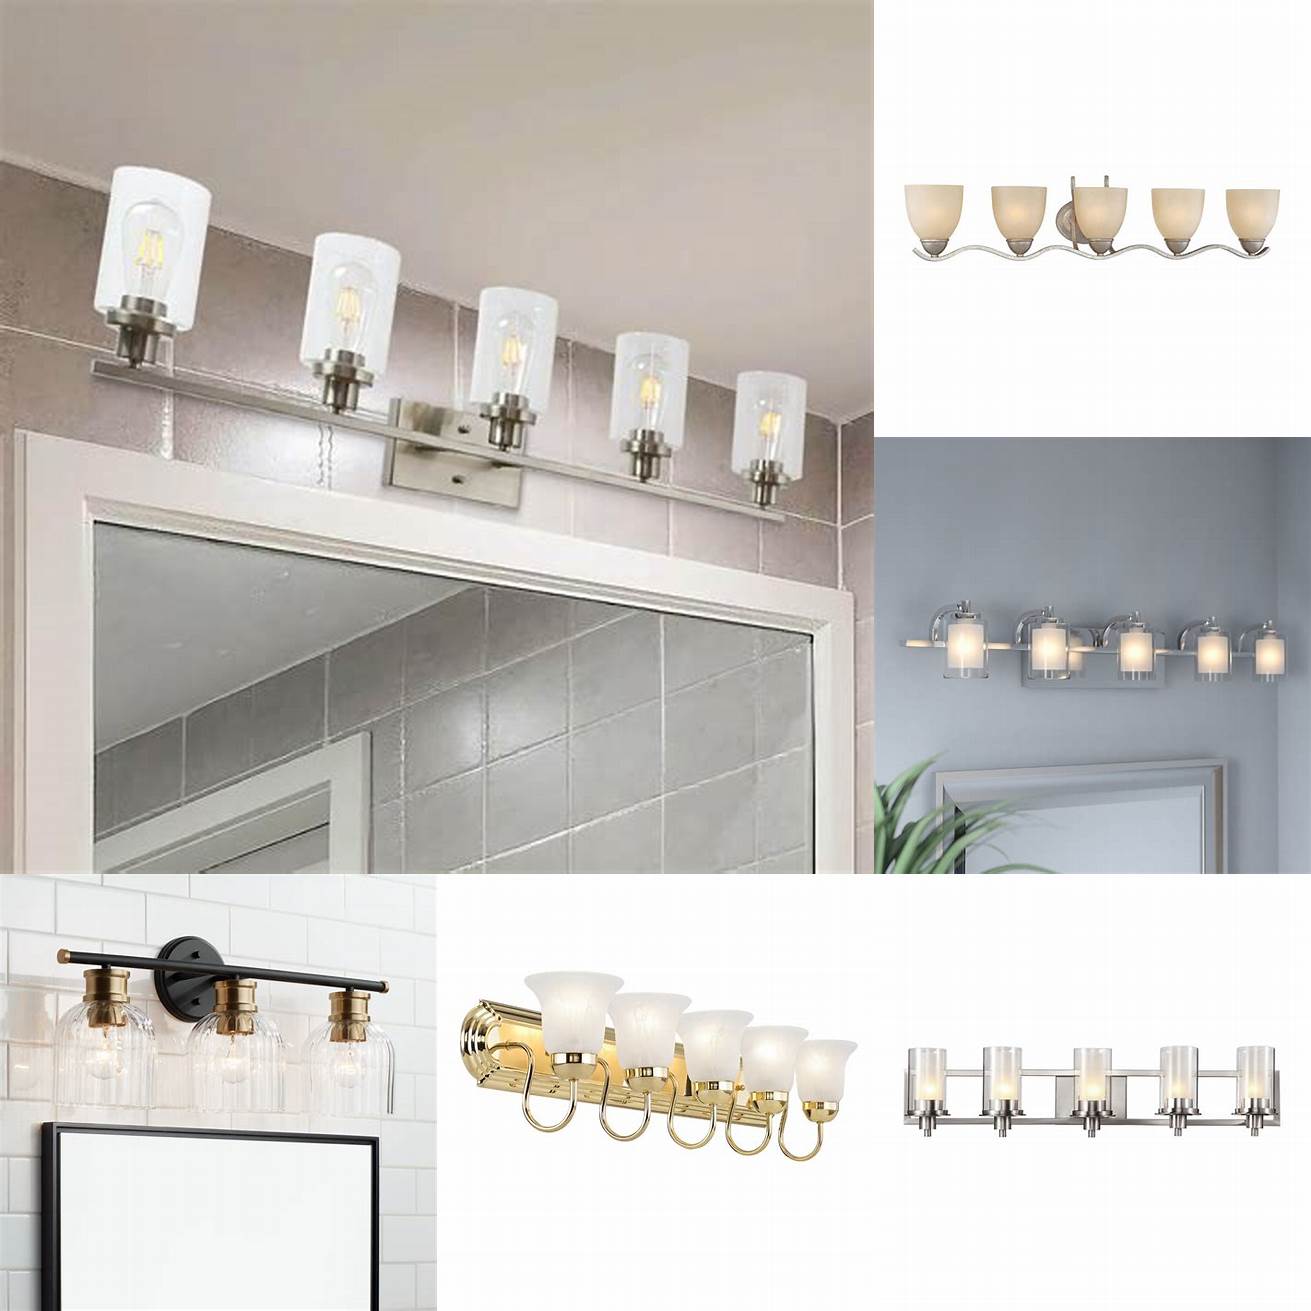 The 5 Light Bathroom Vanity Light can be used with any type of bathroom mirror providing versatility and flexibility